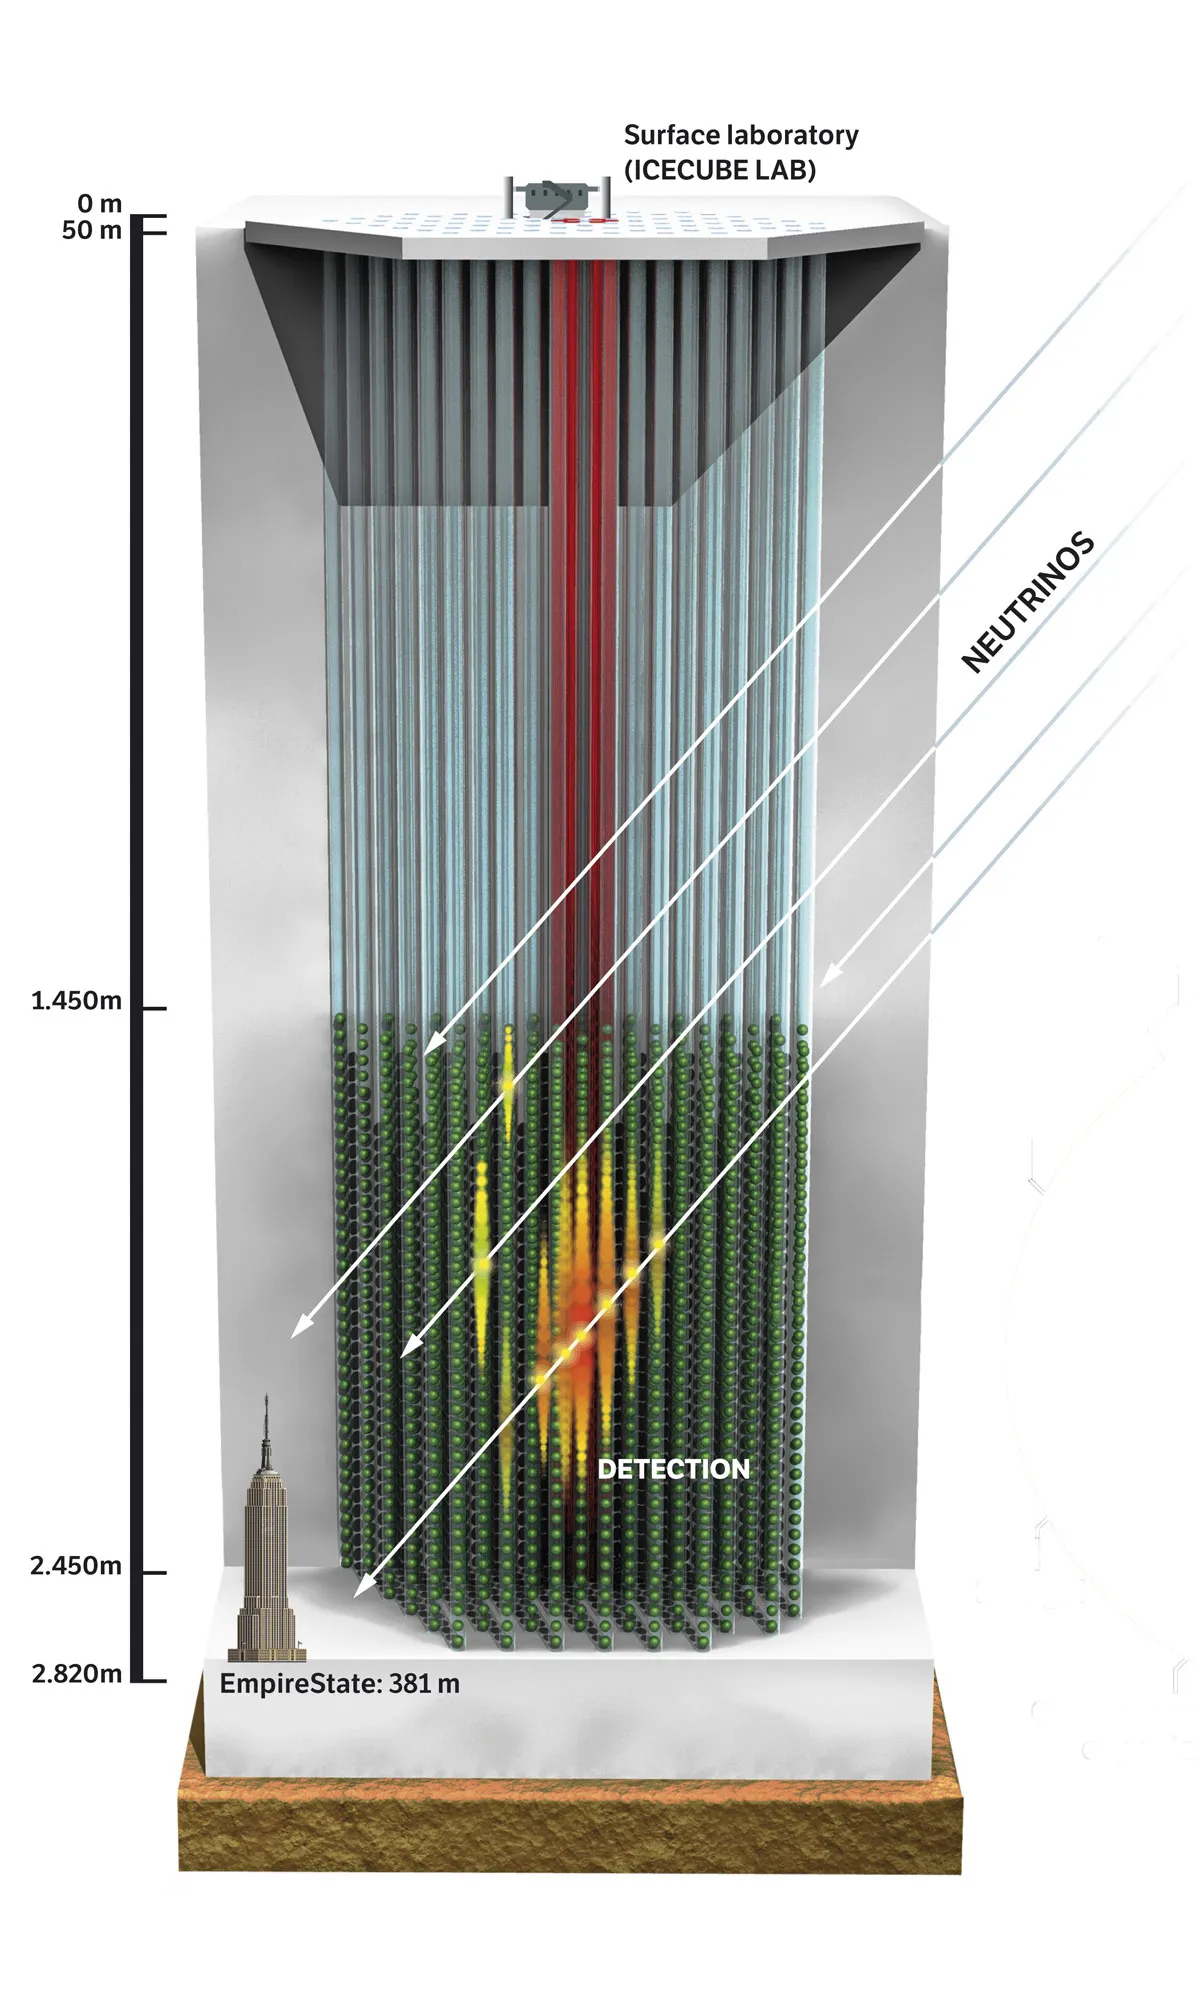 A diagram showing the size of the IceCube detector compared to the Empire State Building.